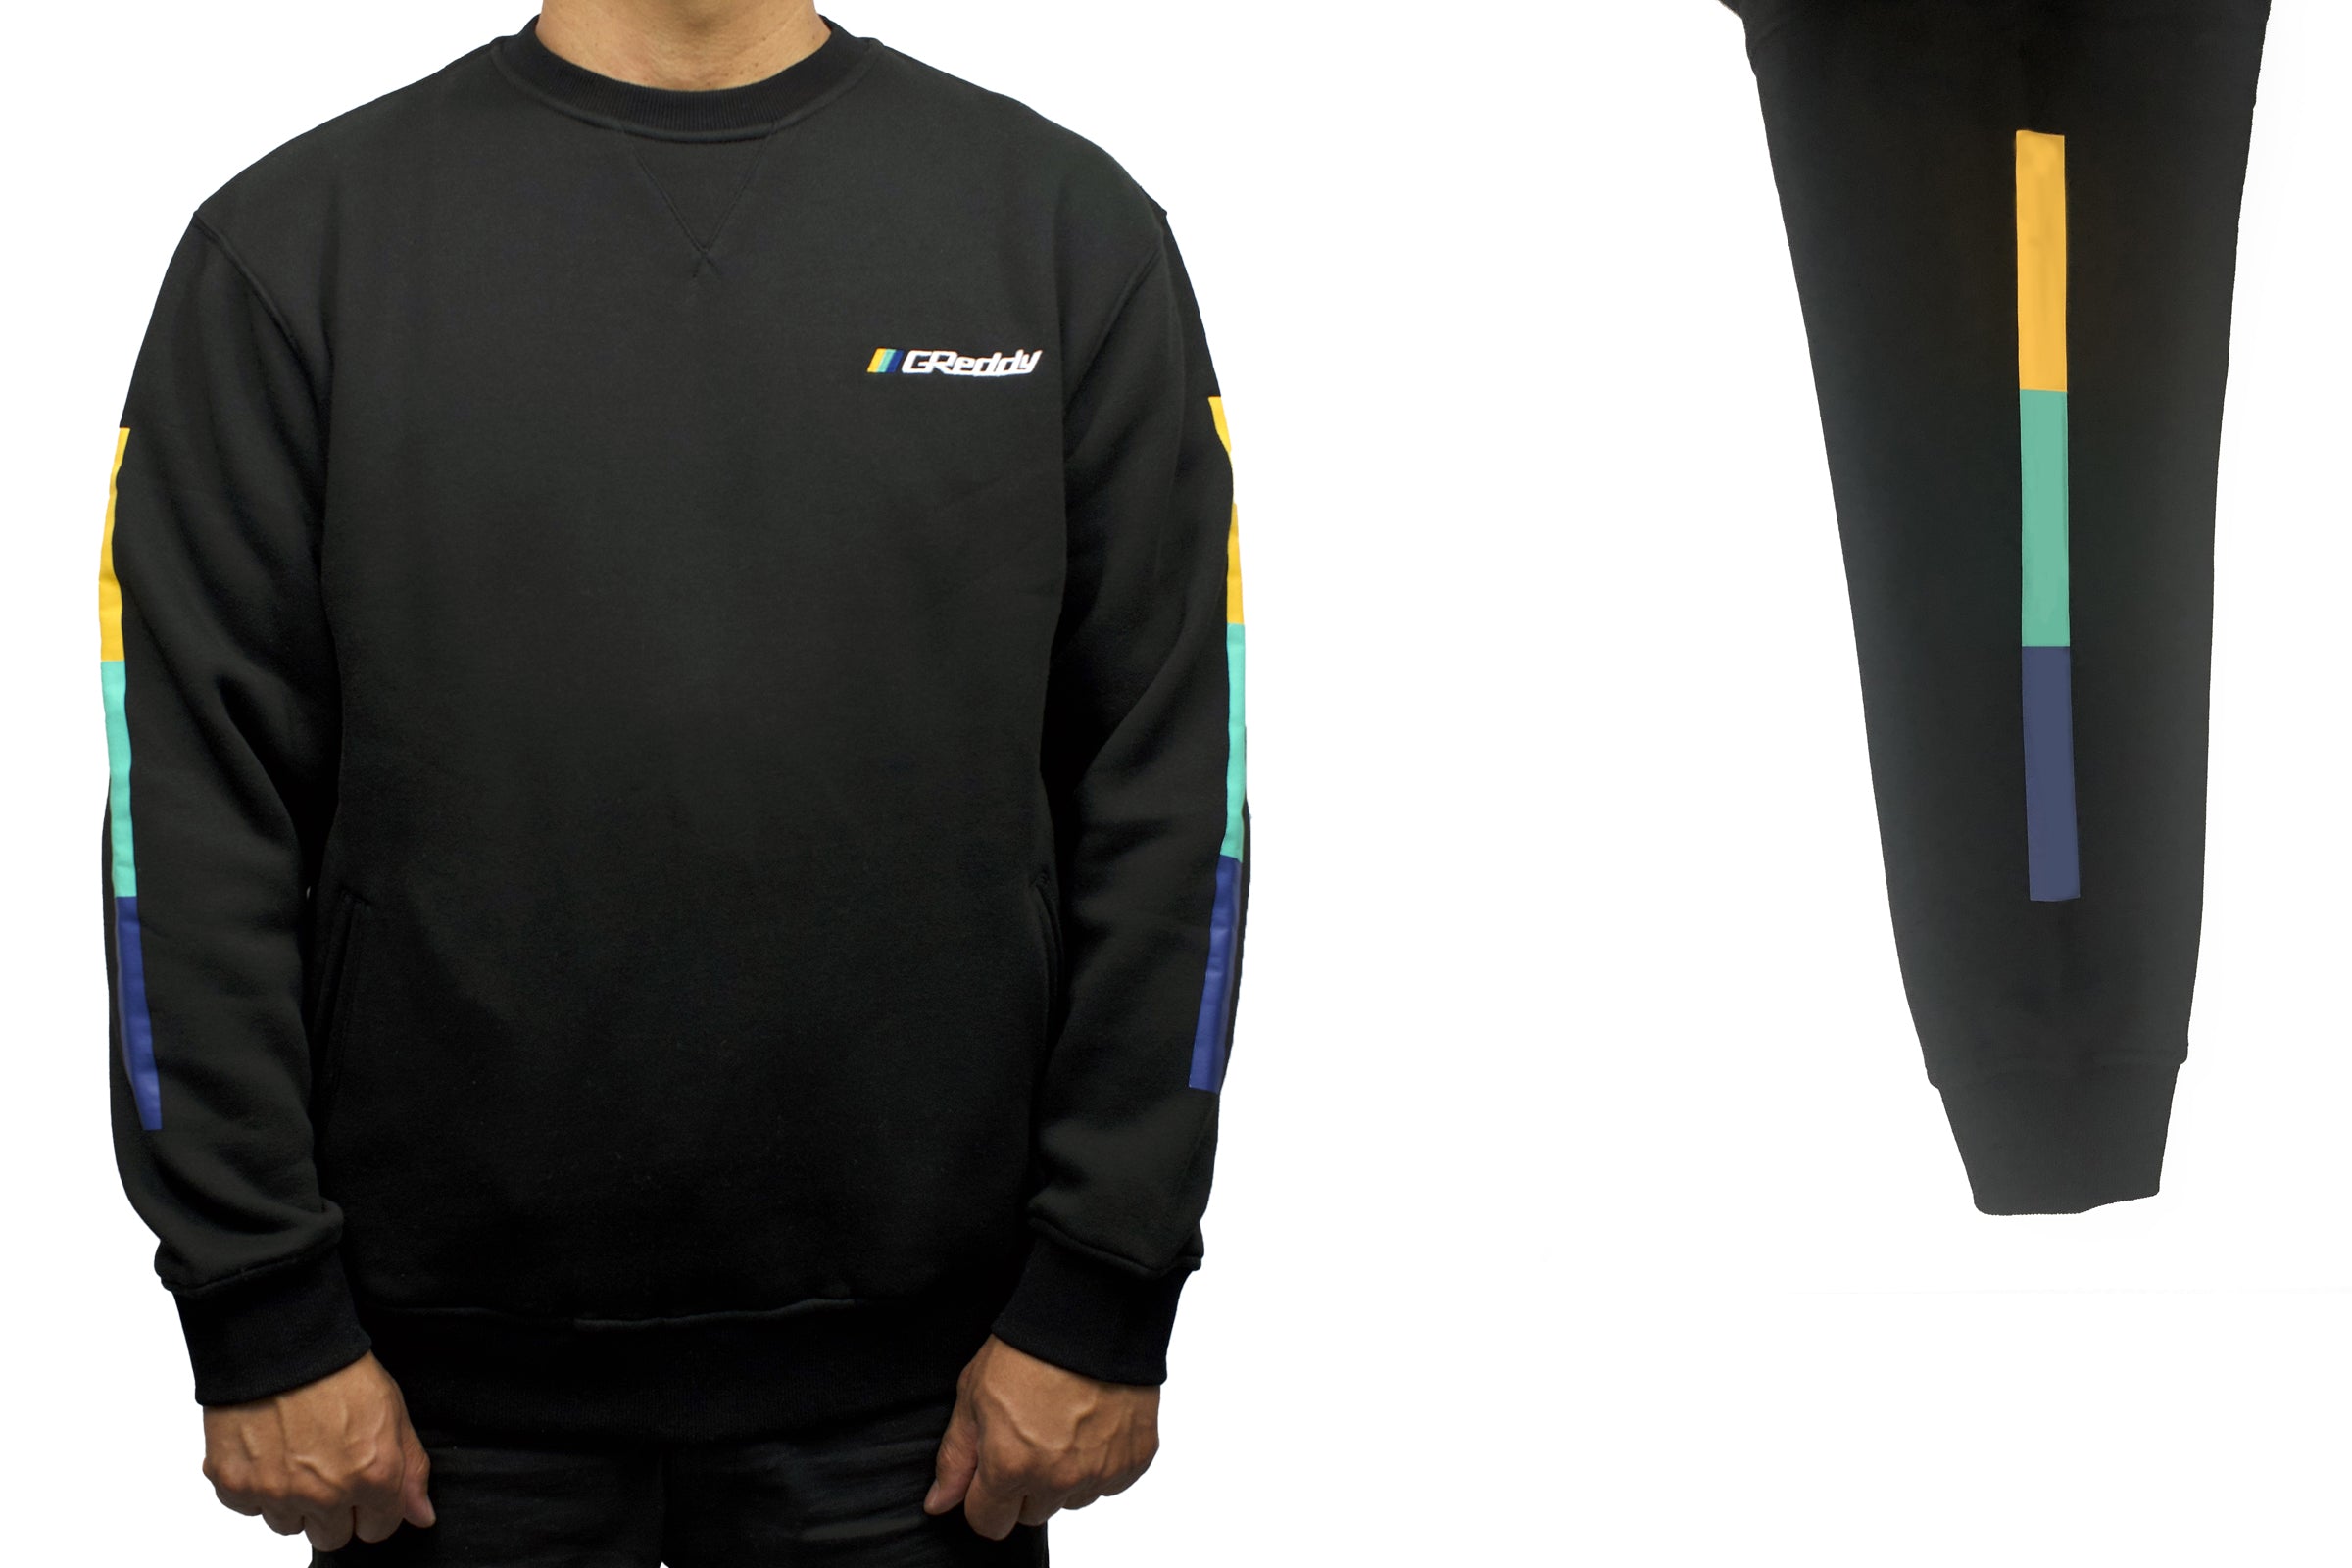 GReddy Embroidered Fleece, with Pockets and Sleeve stripes - Black